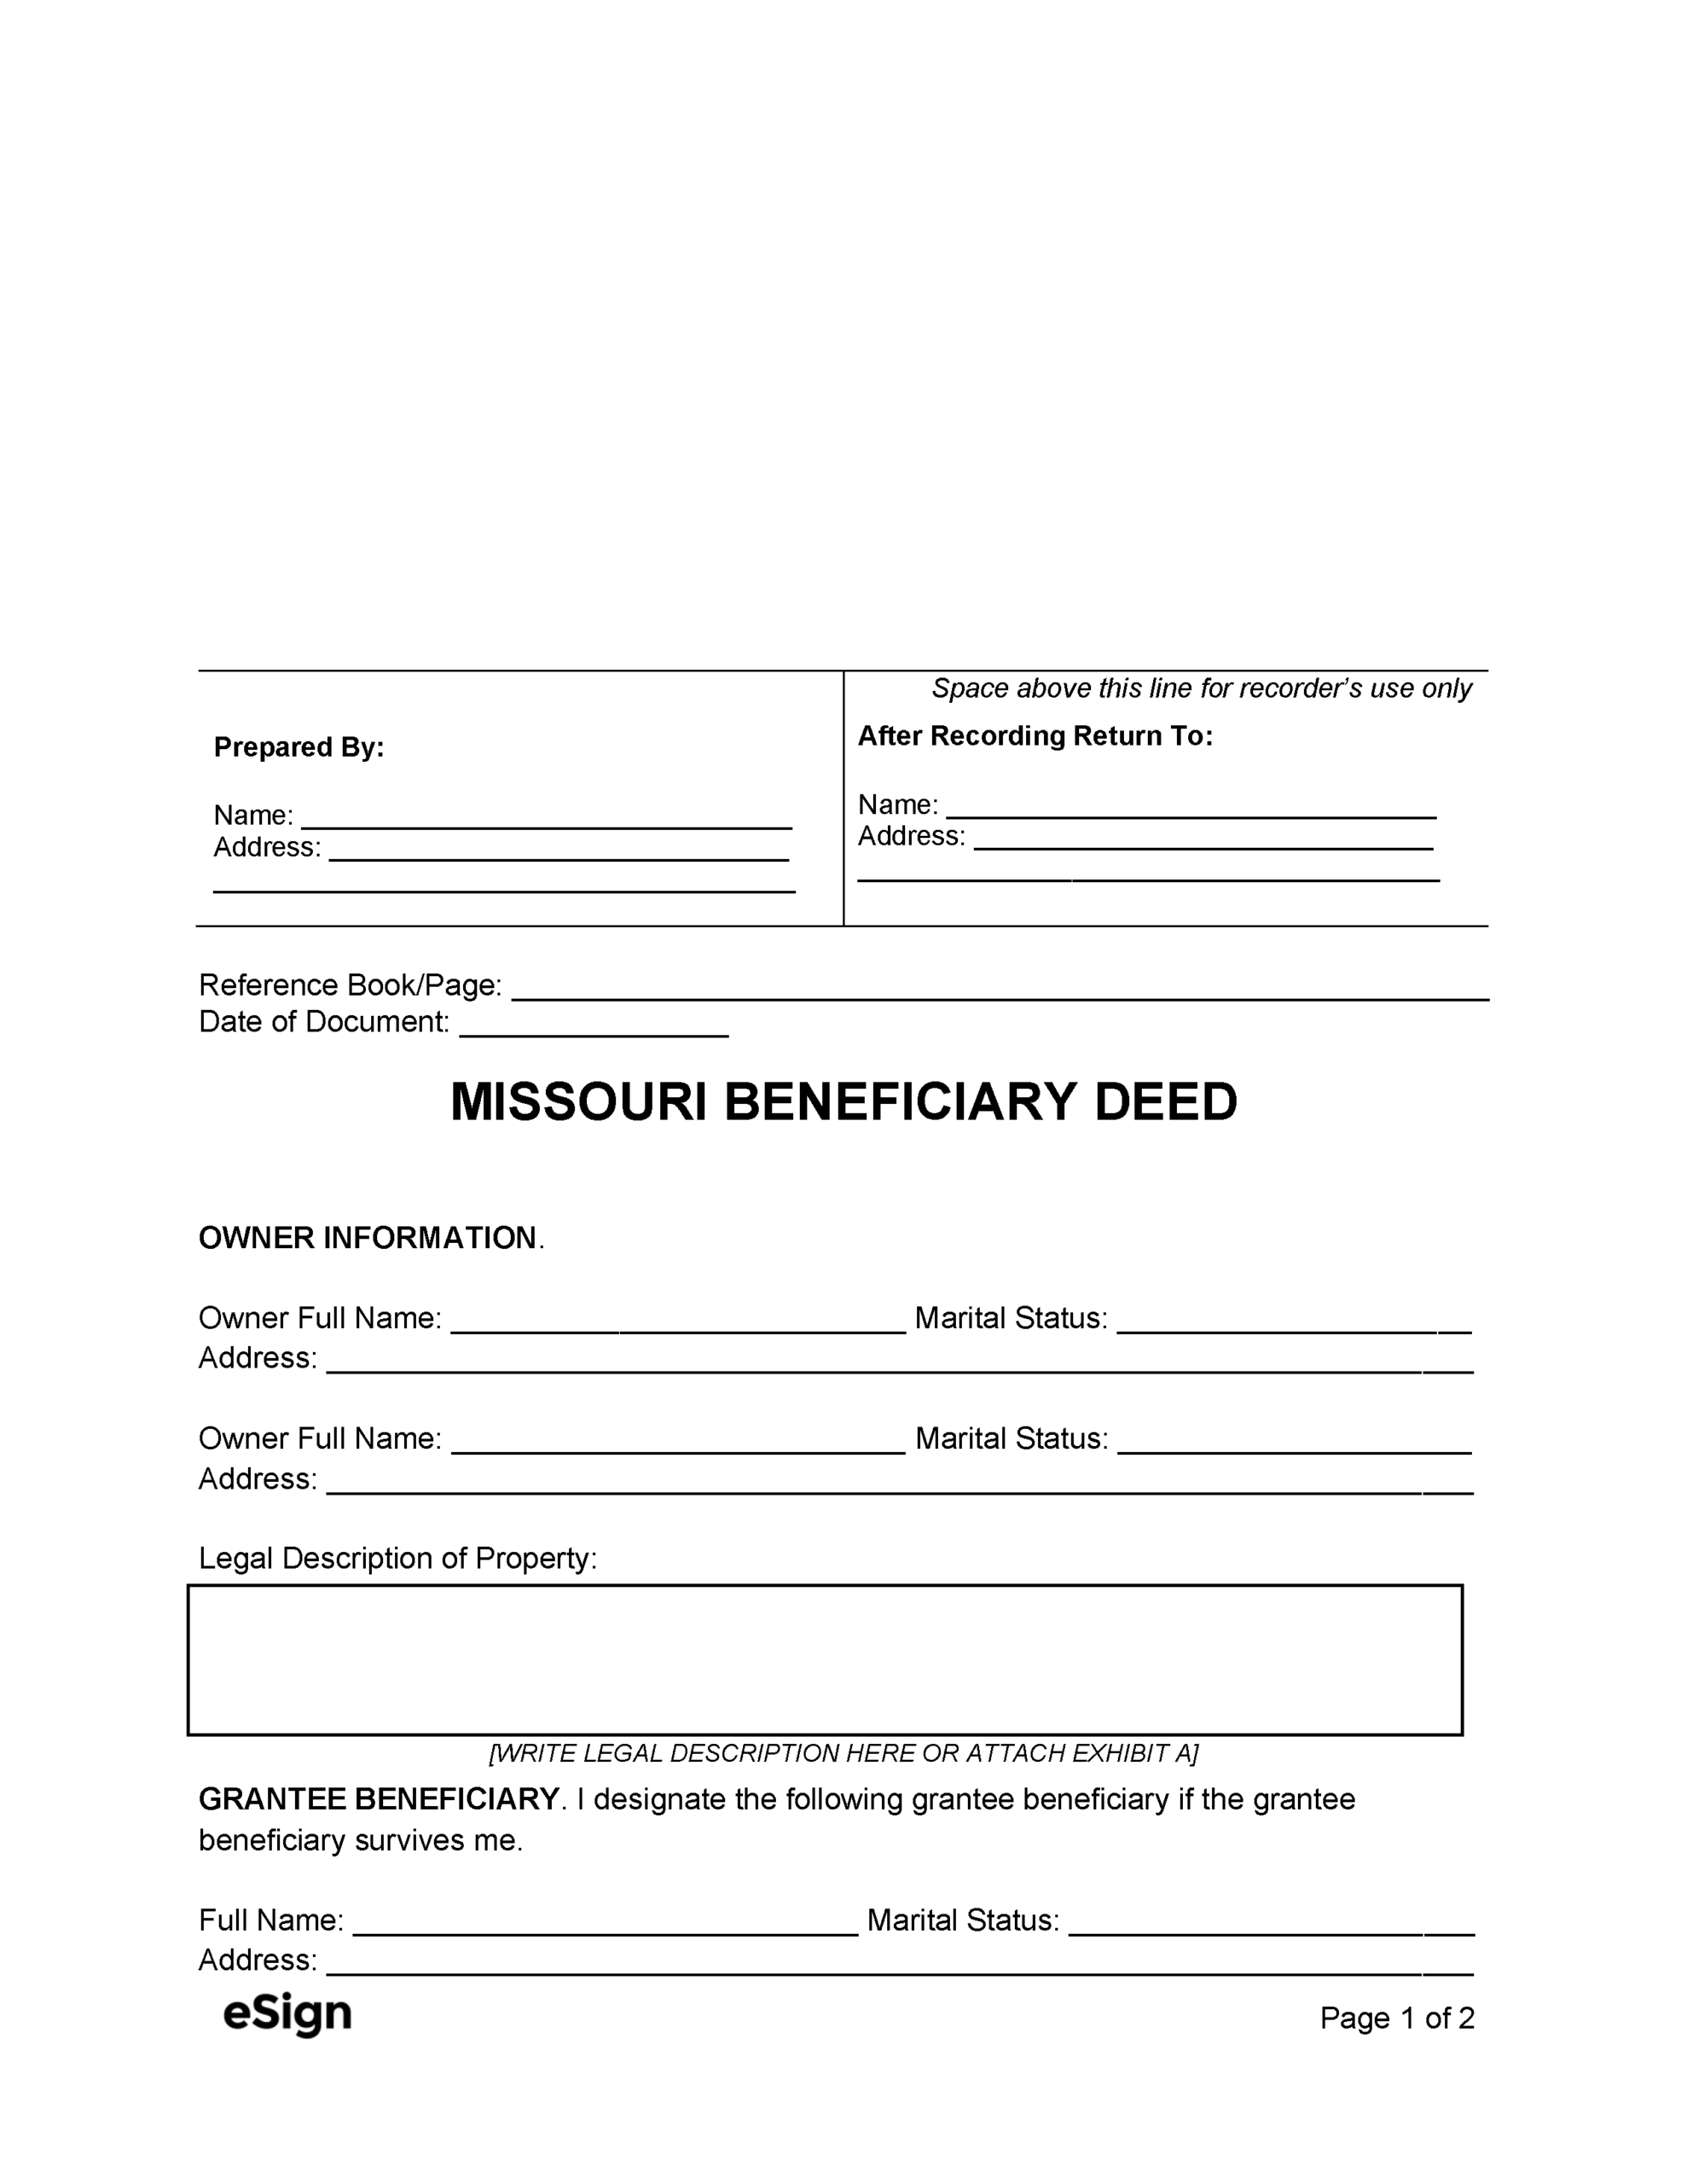 Free Missouri Beneficiary Deed Form | Pdf | Word with regard to Free Printable Beneficiary Deed